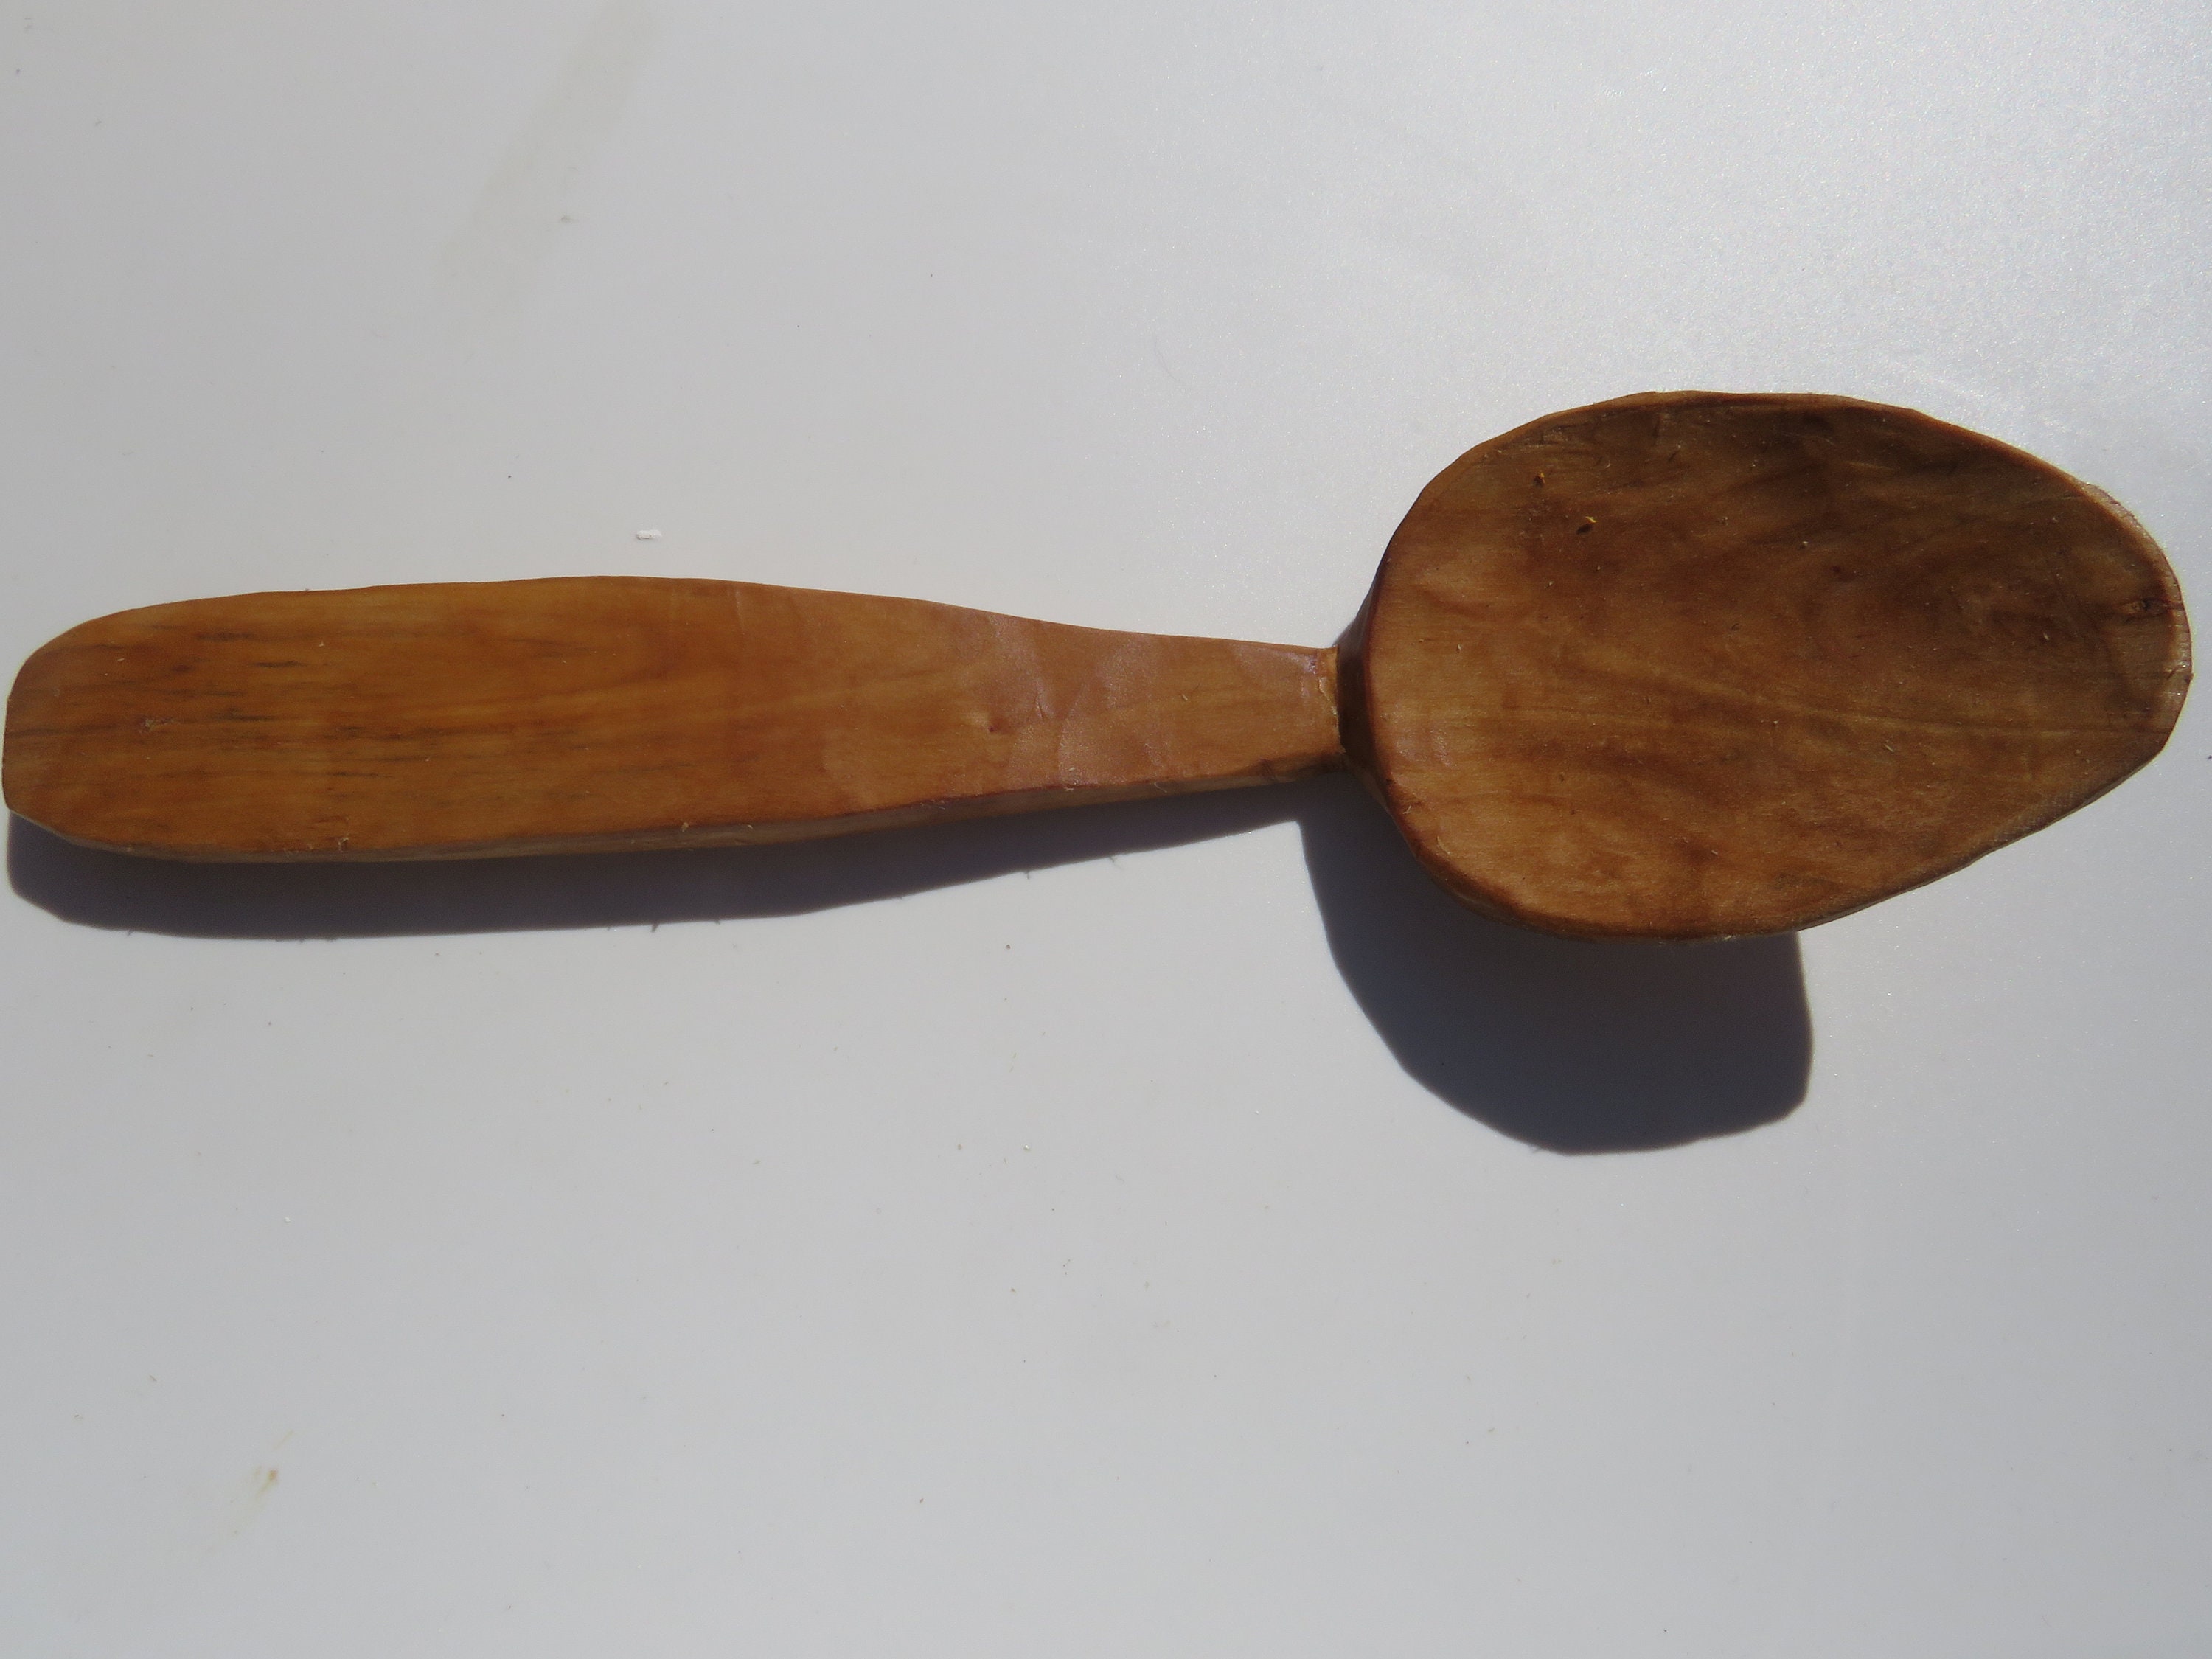 Apple wood hand carved spoon Wooden eating spoon Reusable wooden cutlery  Wooden toddler spoon - The Spoon Crank